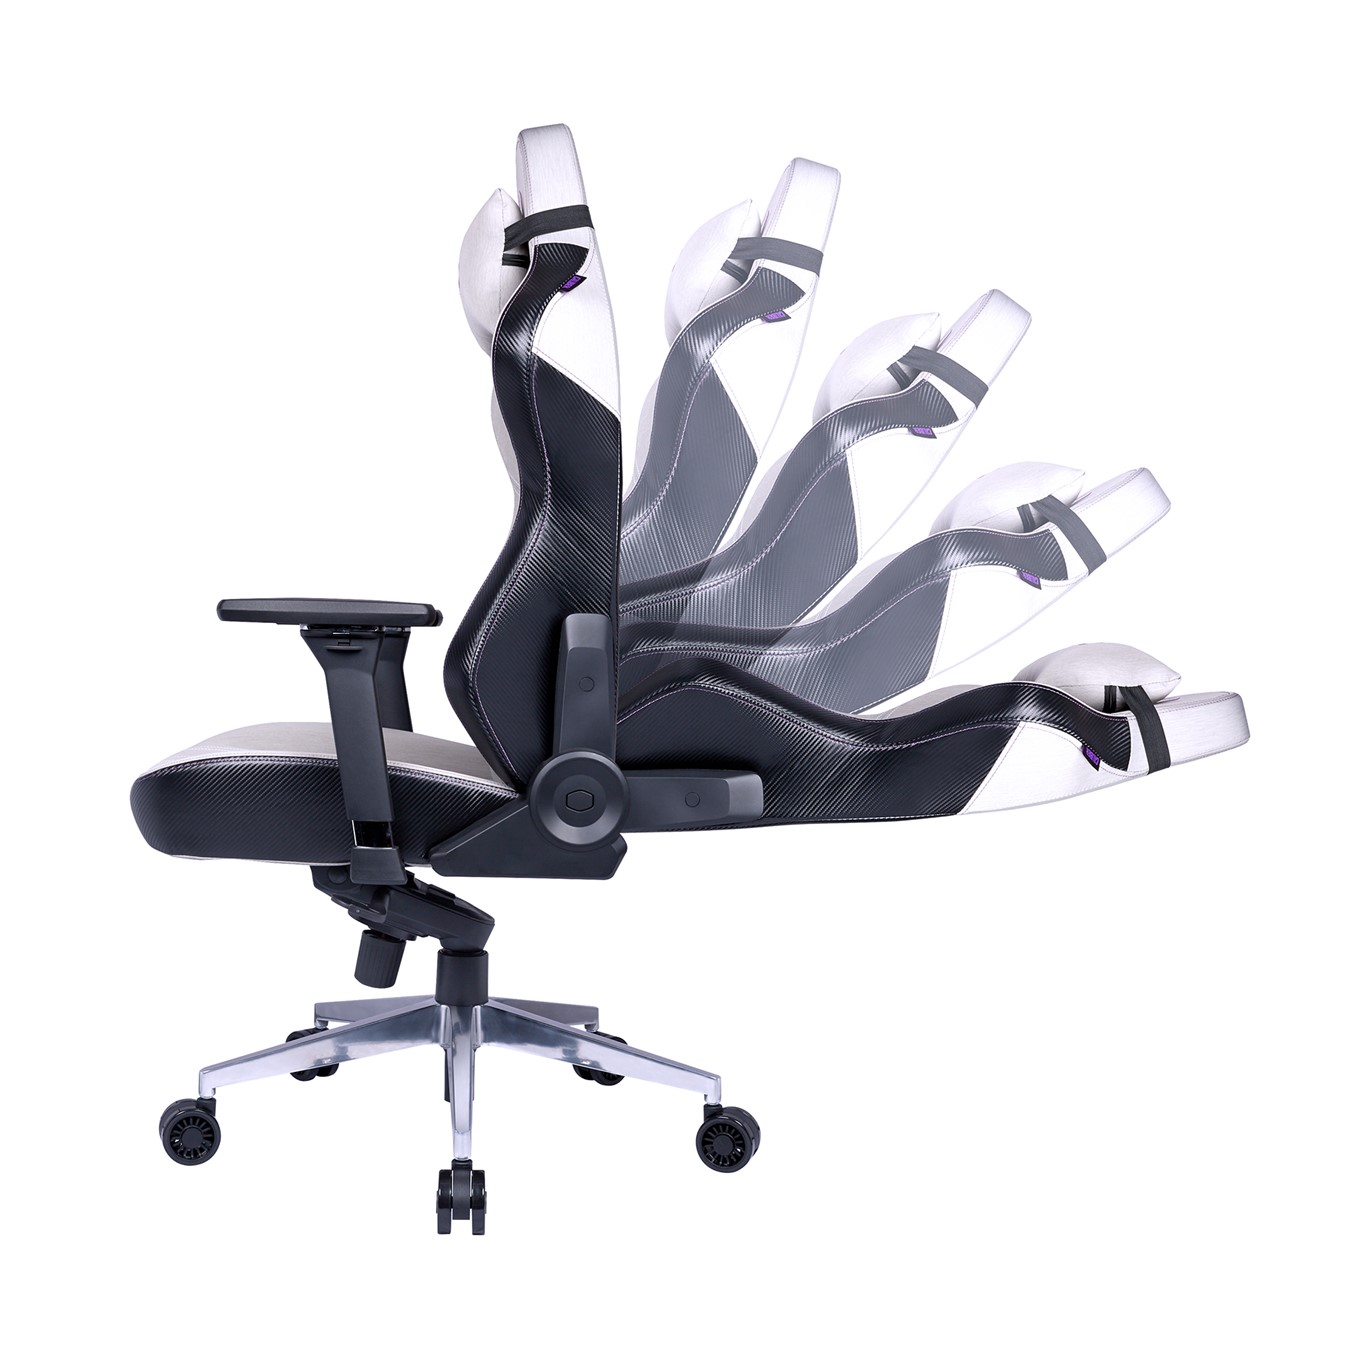 Caliber X1C Gaming Chair - Caliber X1C ergonomic design meets the individual’s needs with a comfortable range of the reclining backrest.